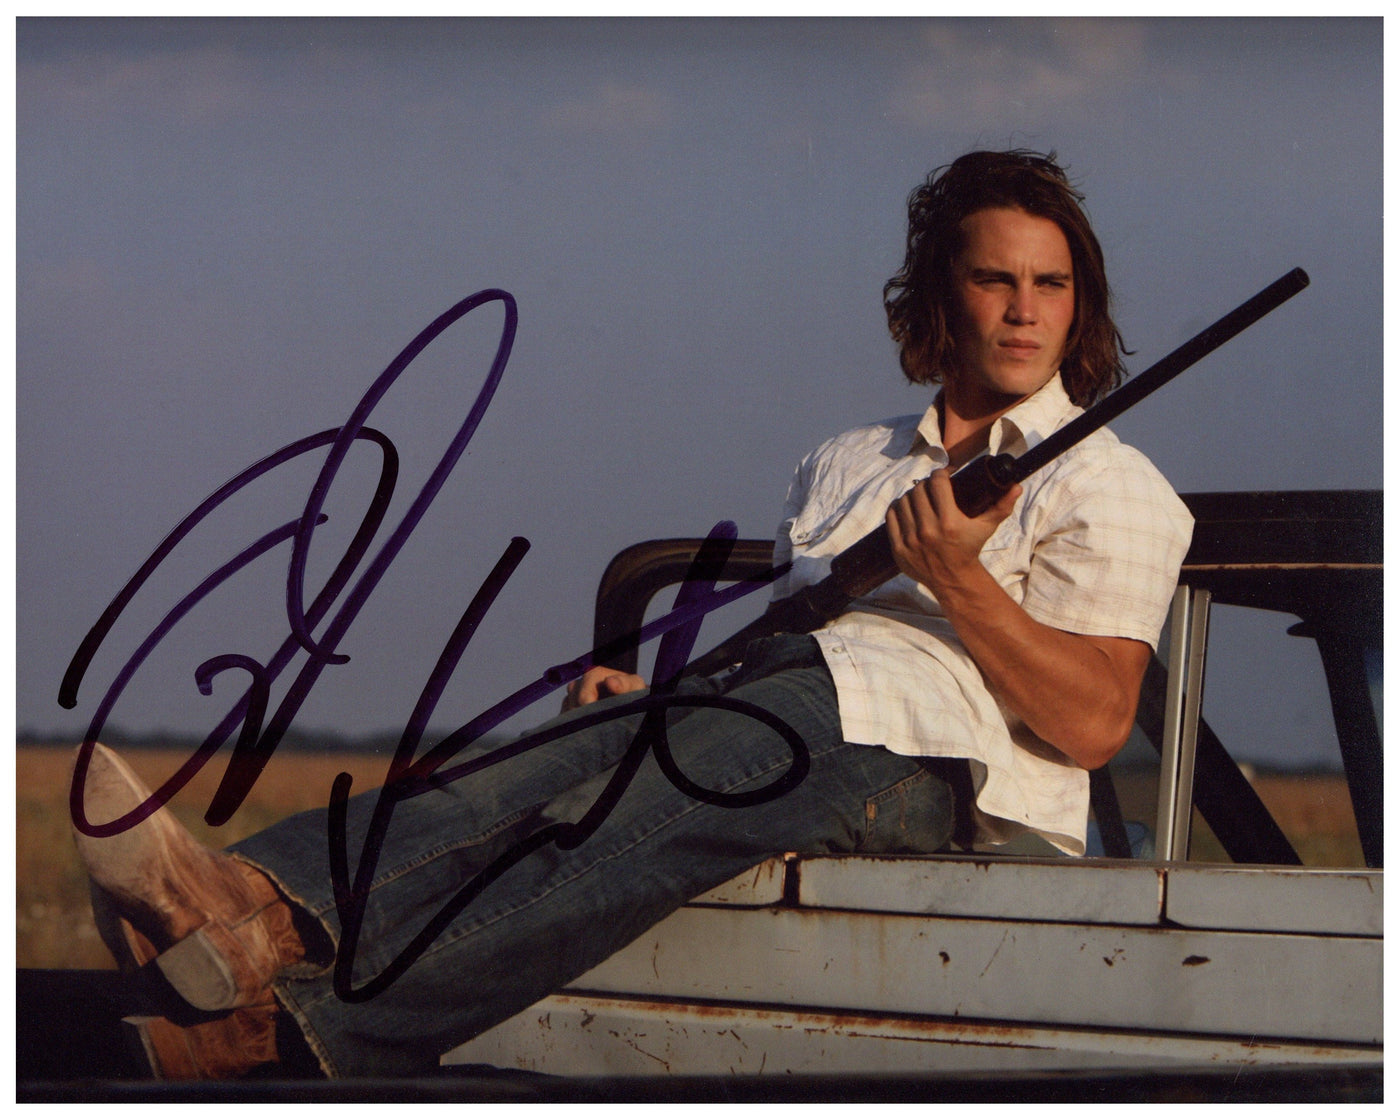 Taylor Kitsch Signed 8x10 Photo Autographed ACOA #2